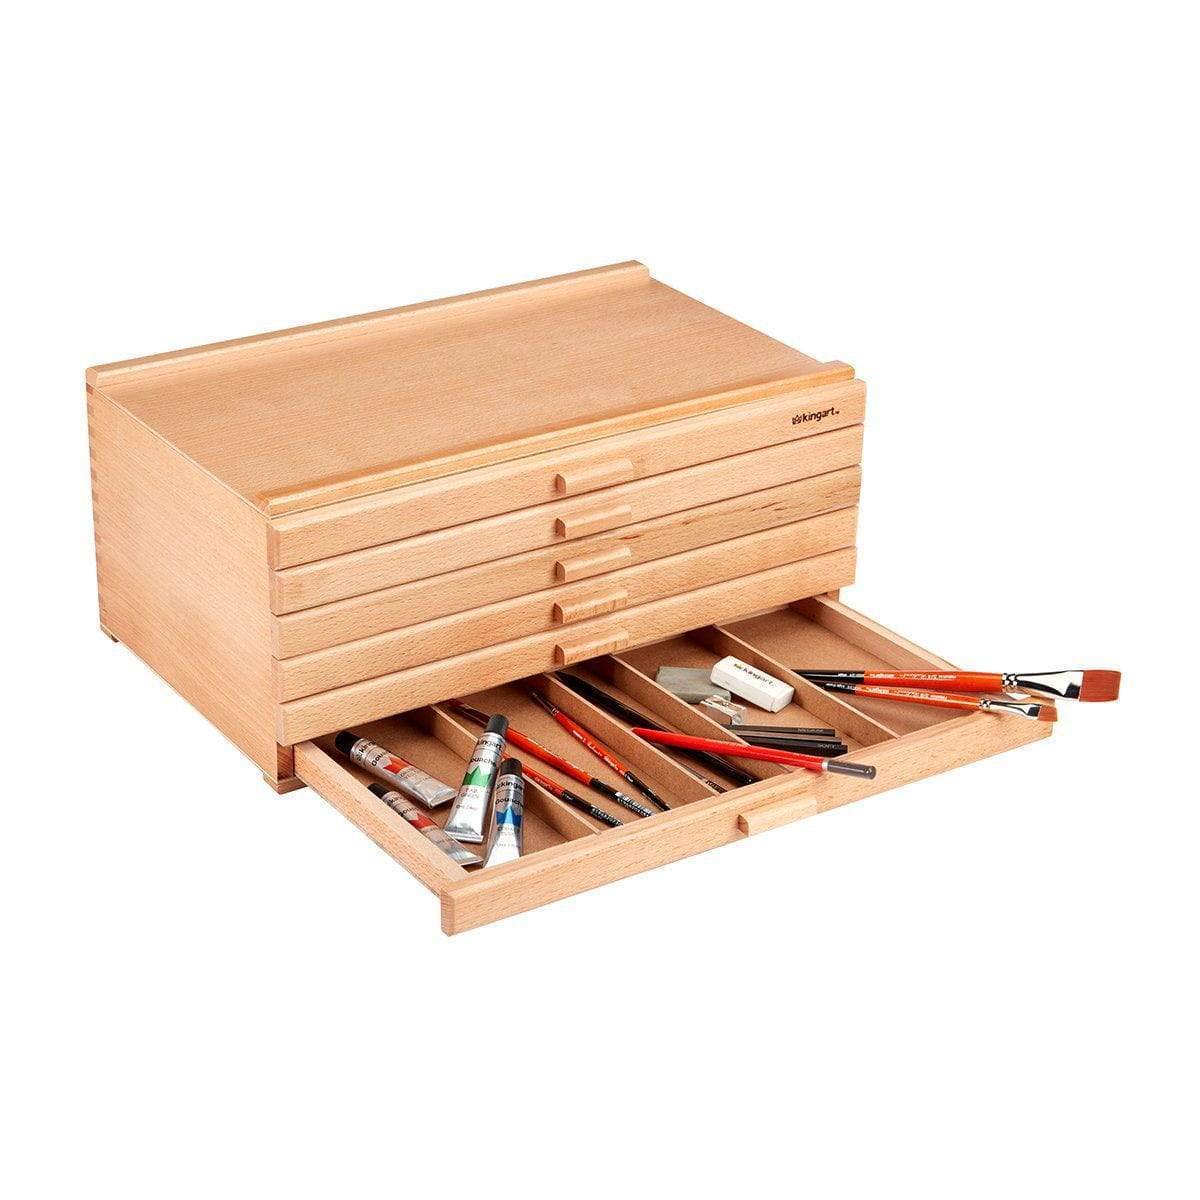 KINGART 723N Wood 6-Drawer Artist SUPPLY STORAGE BOX, 15-3/4” W x 10” D x 6-1/2” H, Natural Finish, Storage for Art Materials including Paint Tubes, Pastels, Pencils, Markers, Brushes and more